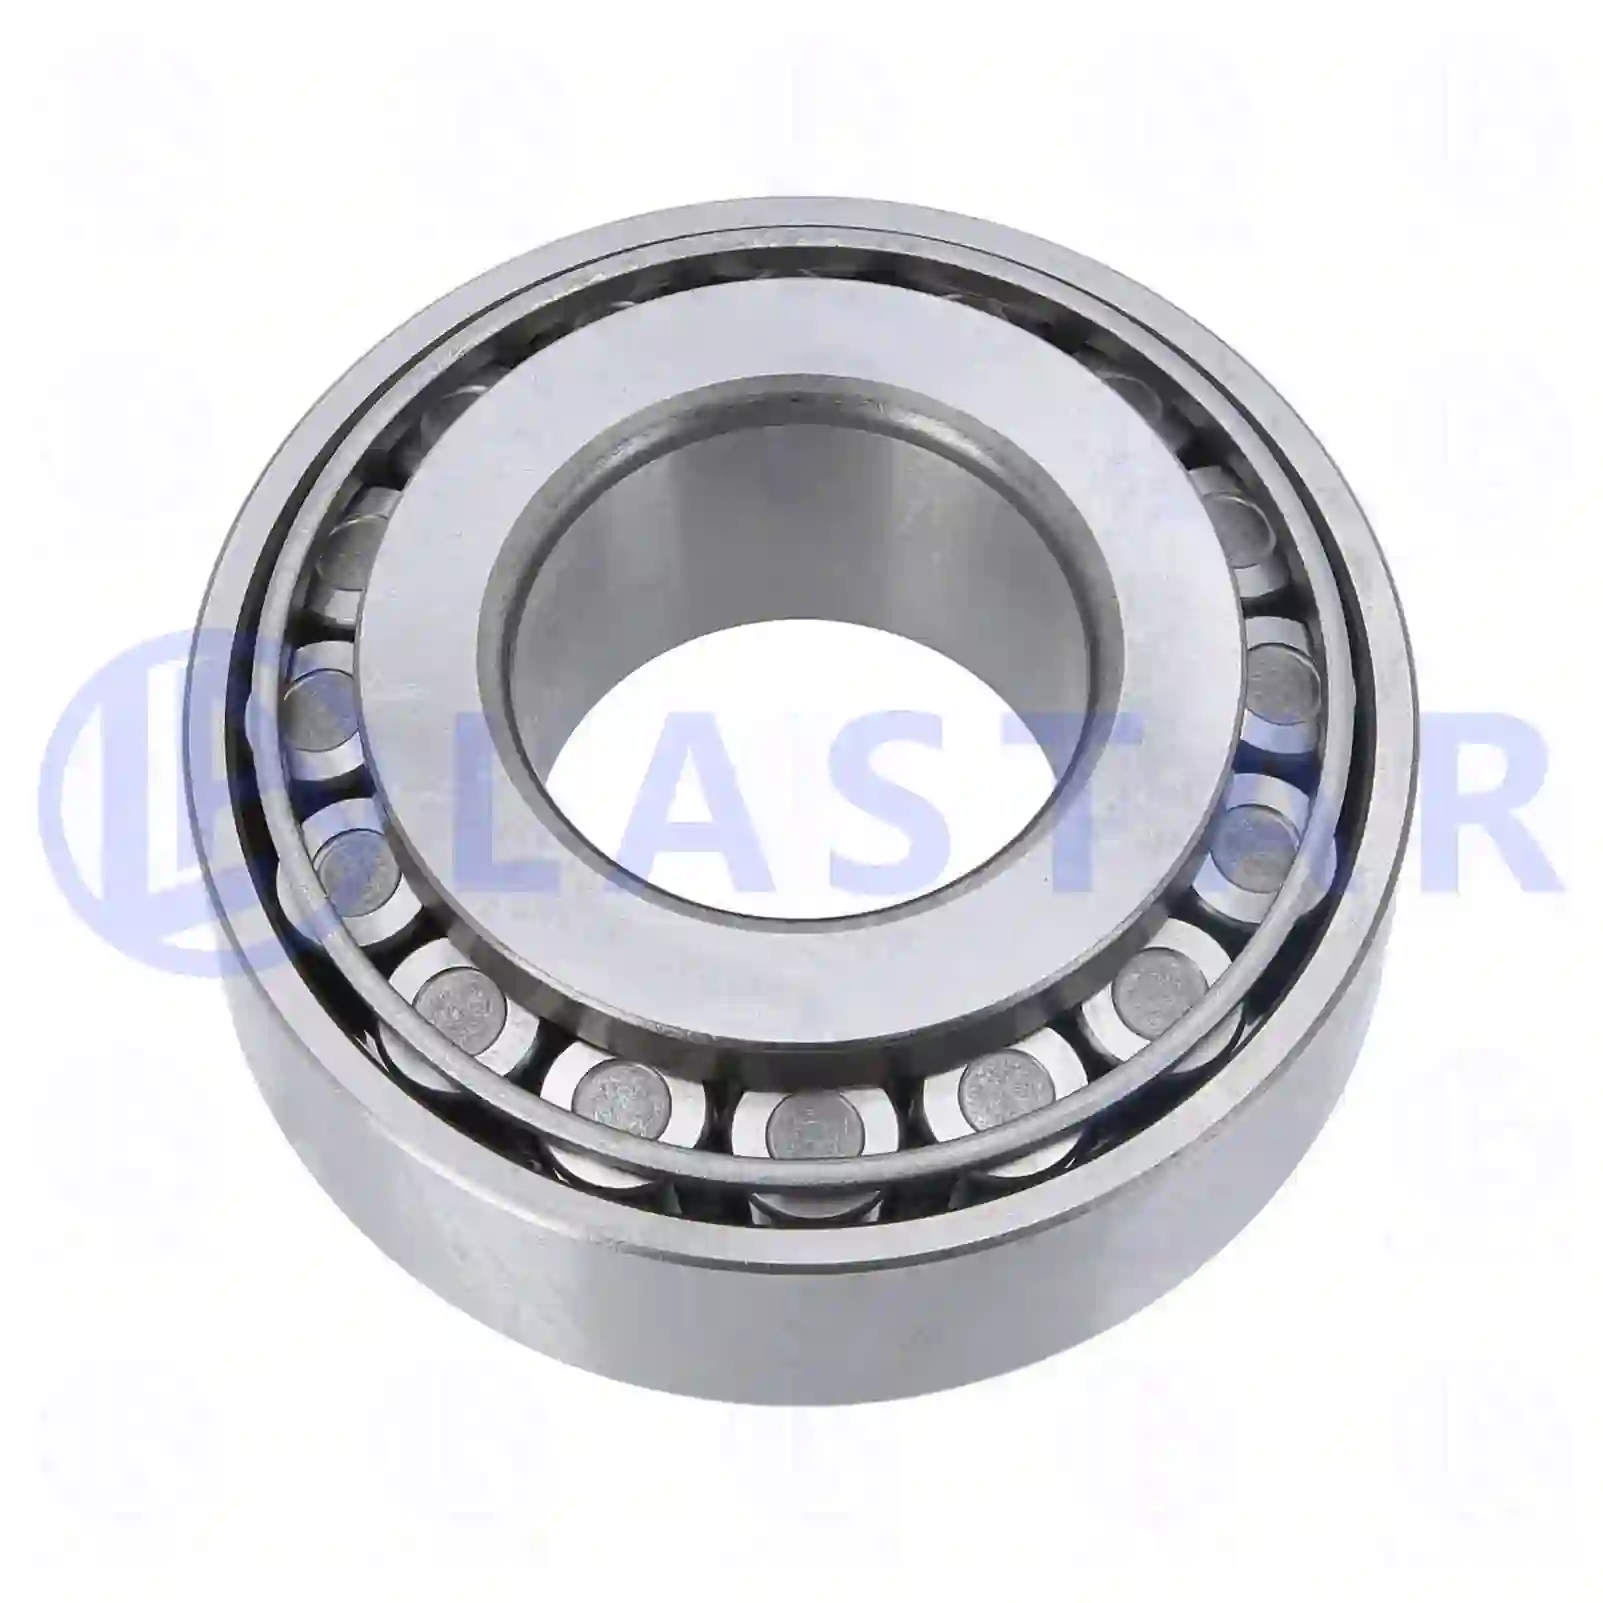 Bearings Tapered roller bearing, la no: 77725193 ,  oem no:0275828, 275823, 275828, 01110020, 26800610, 988450103, 988450103A, 988450129, 988450129A, 26800610, 3612965000, 06324990017, 0009812005, 0069810805, 0069816905, 0069817405, 0109819305, 0345386000, 38326-90000, 0023432311, 0959532310, 0959532311, 5000022267, 4200003200, 14764, 178427, 179427, 11095, 183338, ZG02973-0008 Lastar Spare Part | Truck Spare Parts, Auotomotive Spare Parts